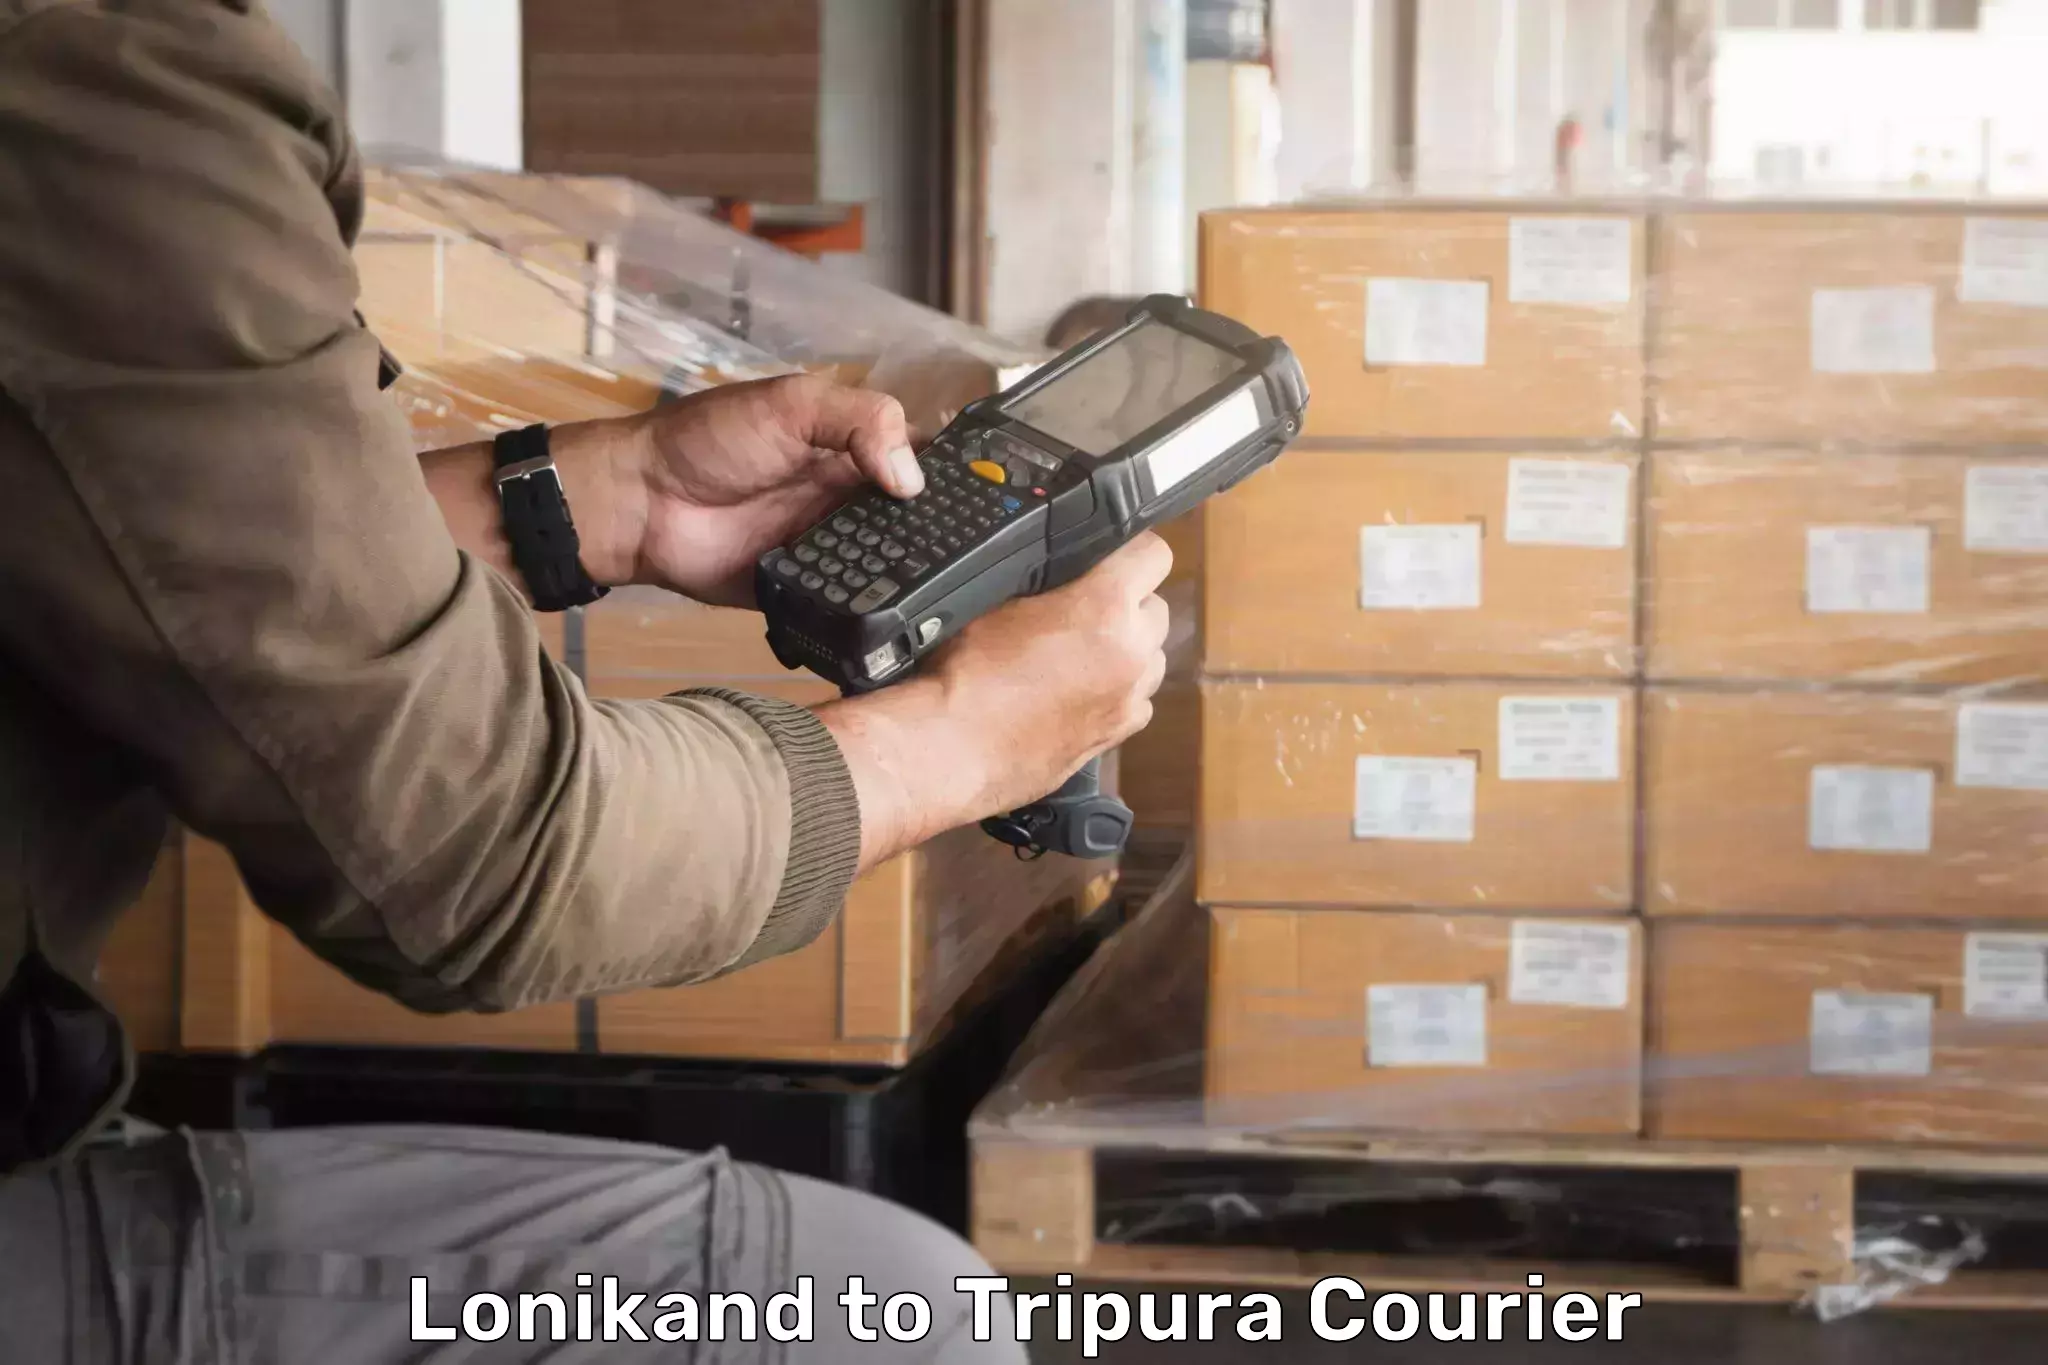 Expedited shipping methods in Lonikand to Udaipur Tripura